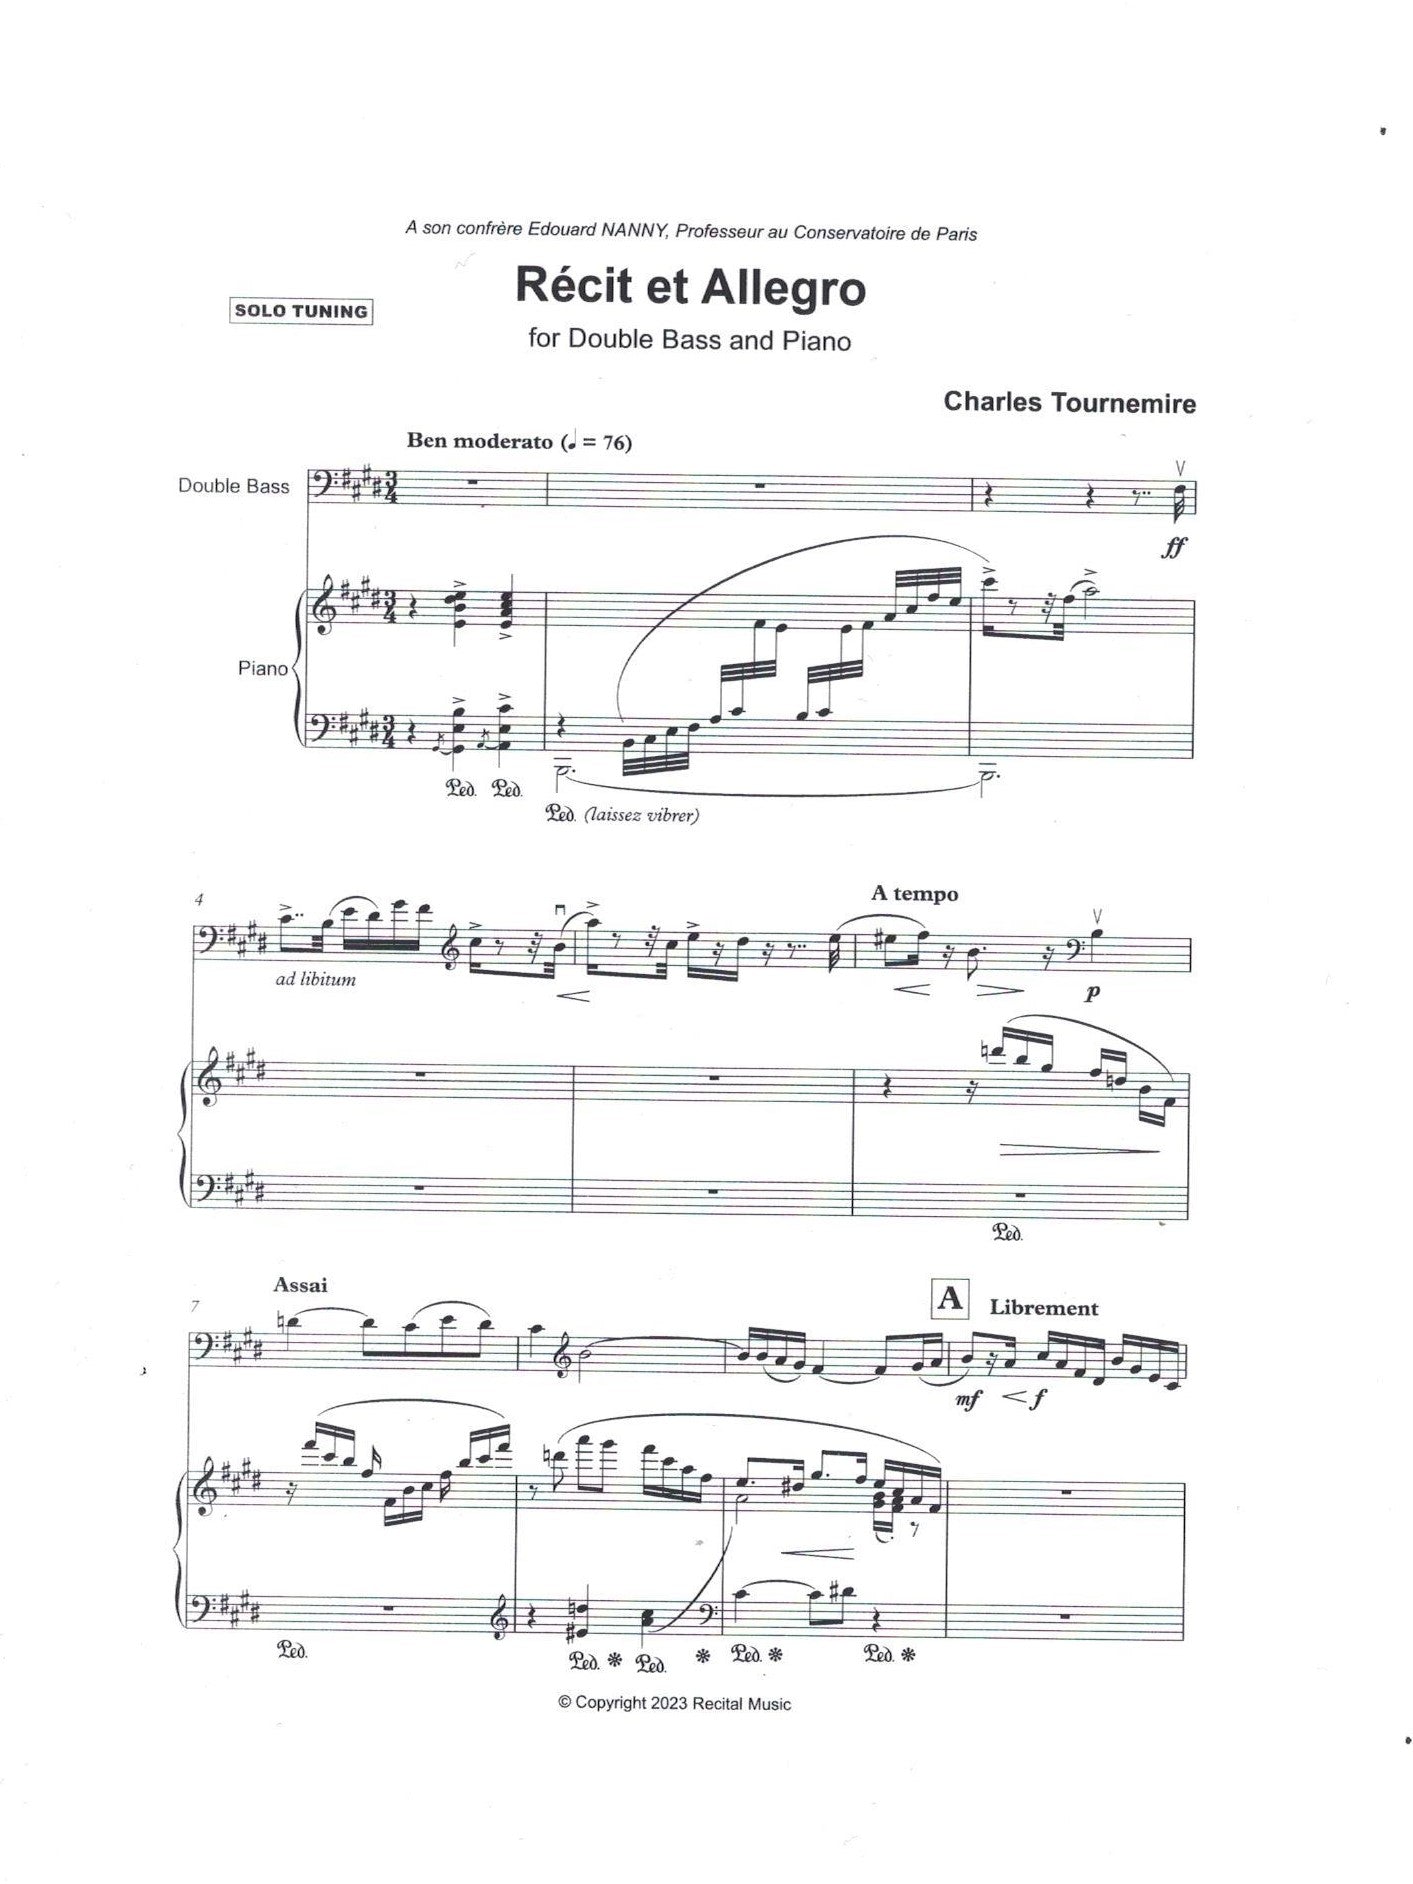 Charles Tournemire: Récit et Allegro for double bass & piano